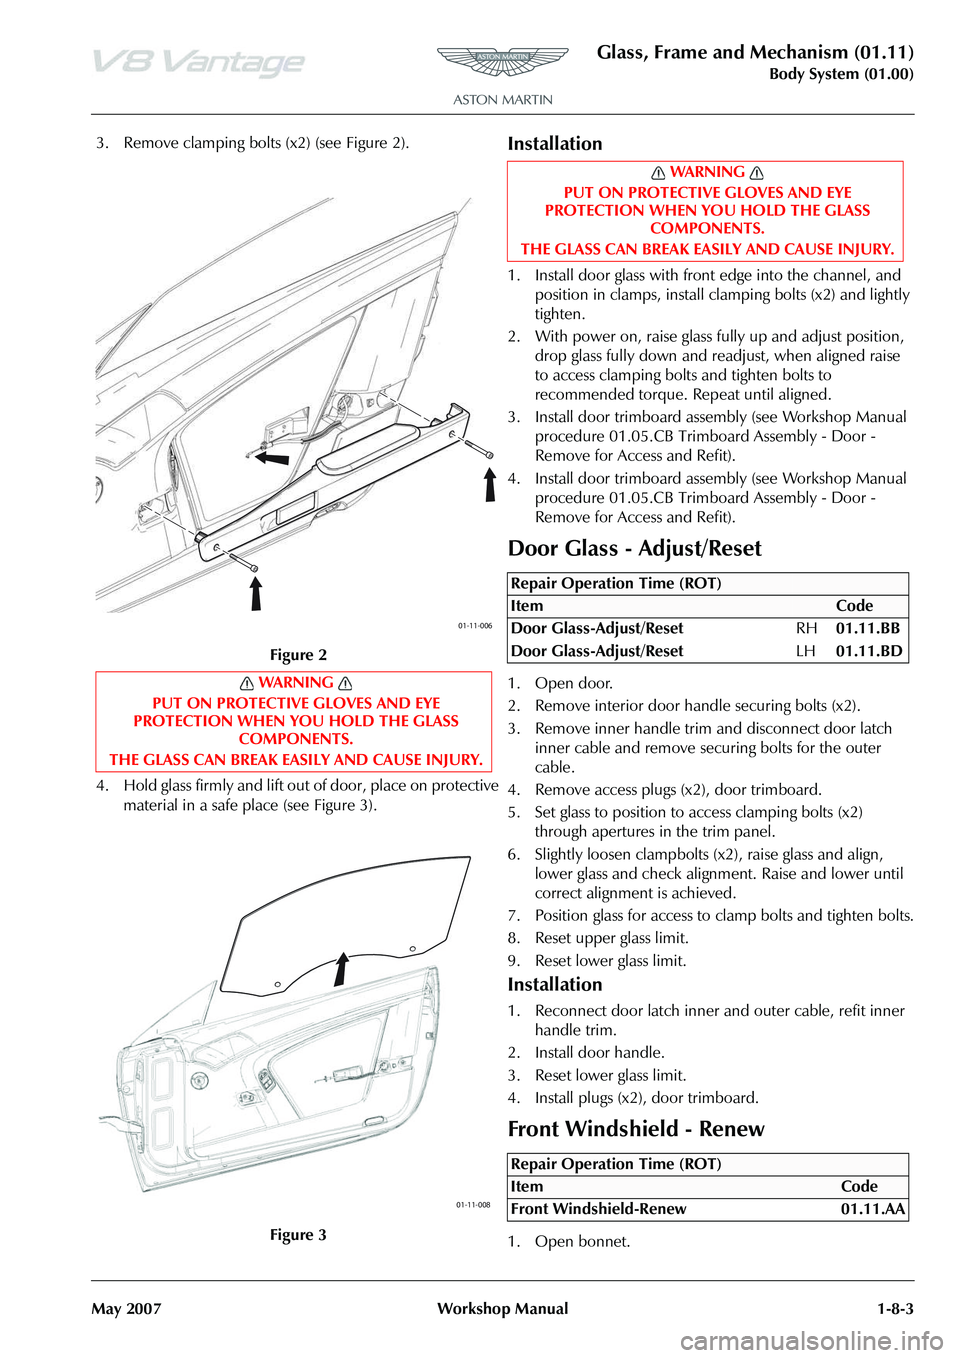 ASTON MARTIN V8 VANTAGE 2010  Workshop Manual Glass, Frame and Mechanism (01.11)
Body System (01.00)
May 2007 Workshop Manual 1-8-3
3. Remove clamping bolts (x2) (see Figure 2).
4. Hold glass firmly and lift out of door, place on protective  mate